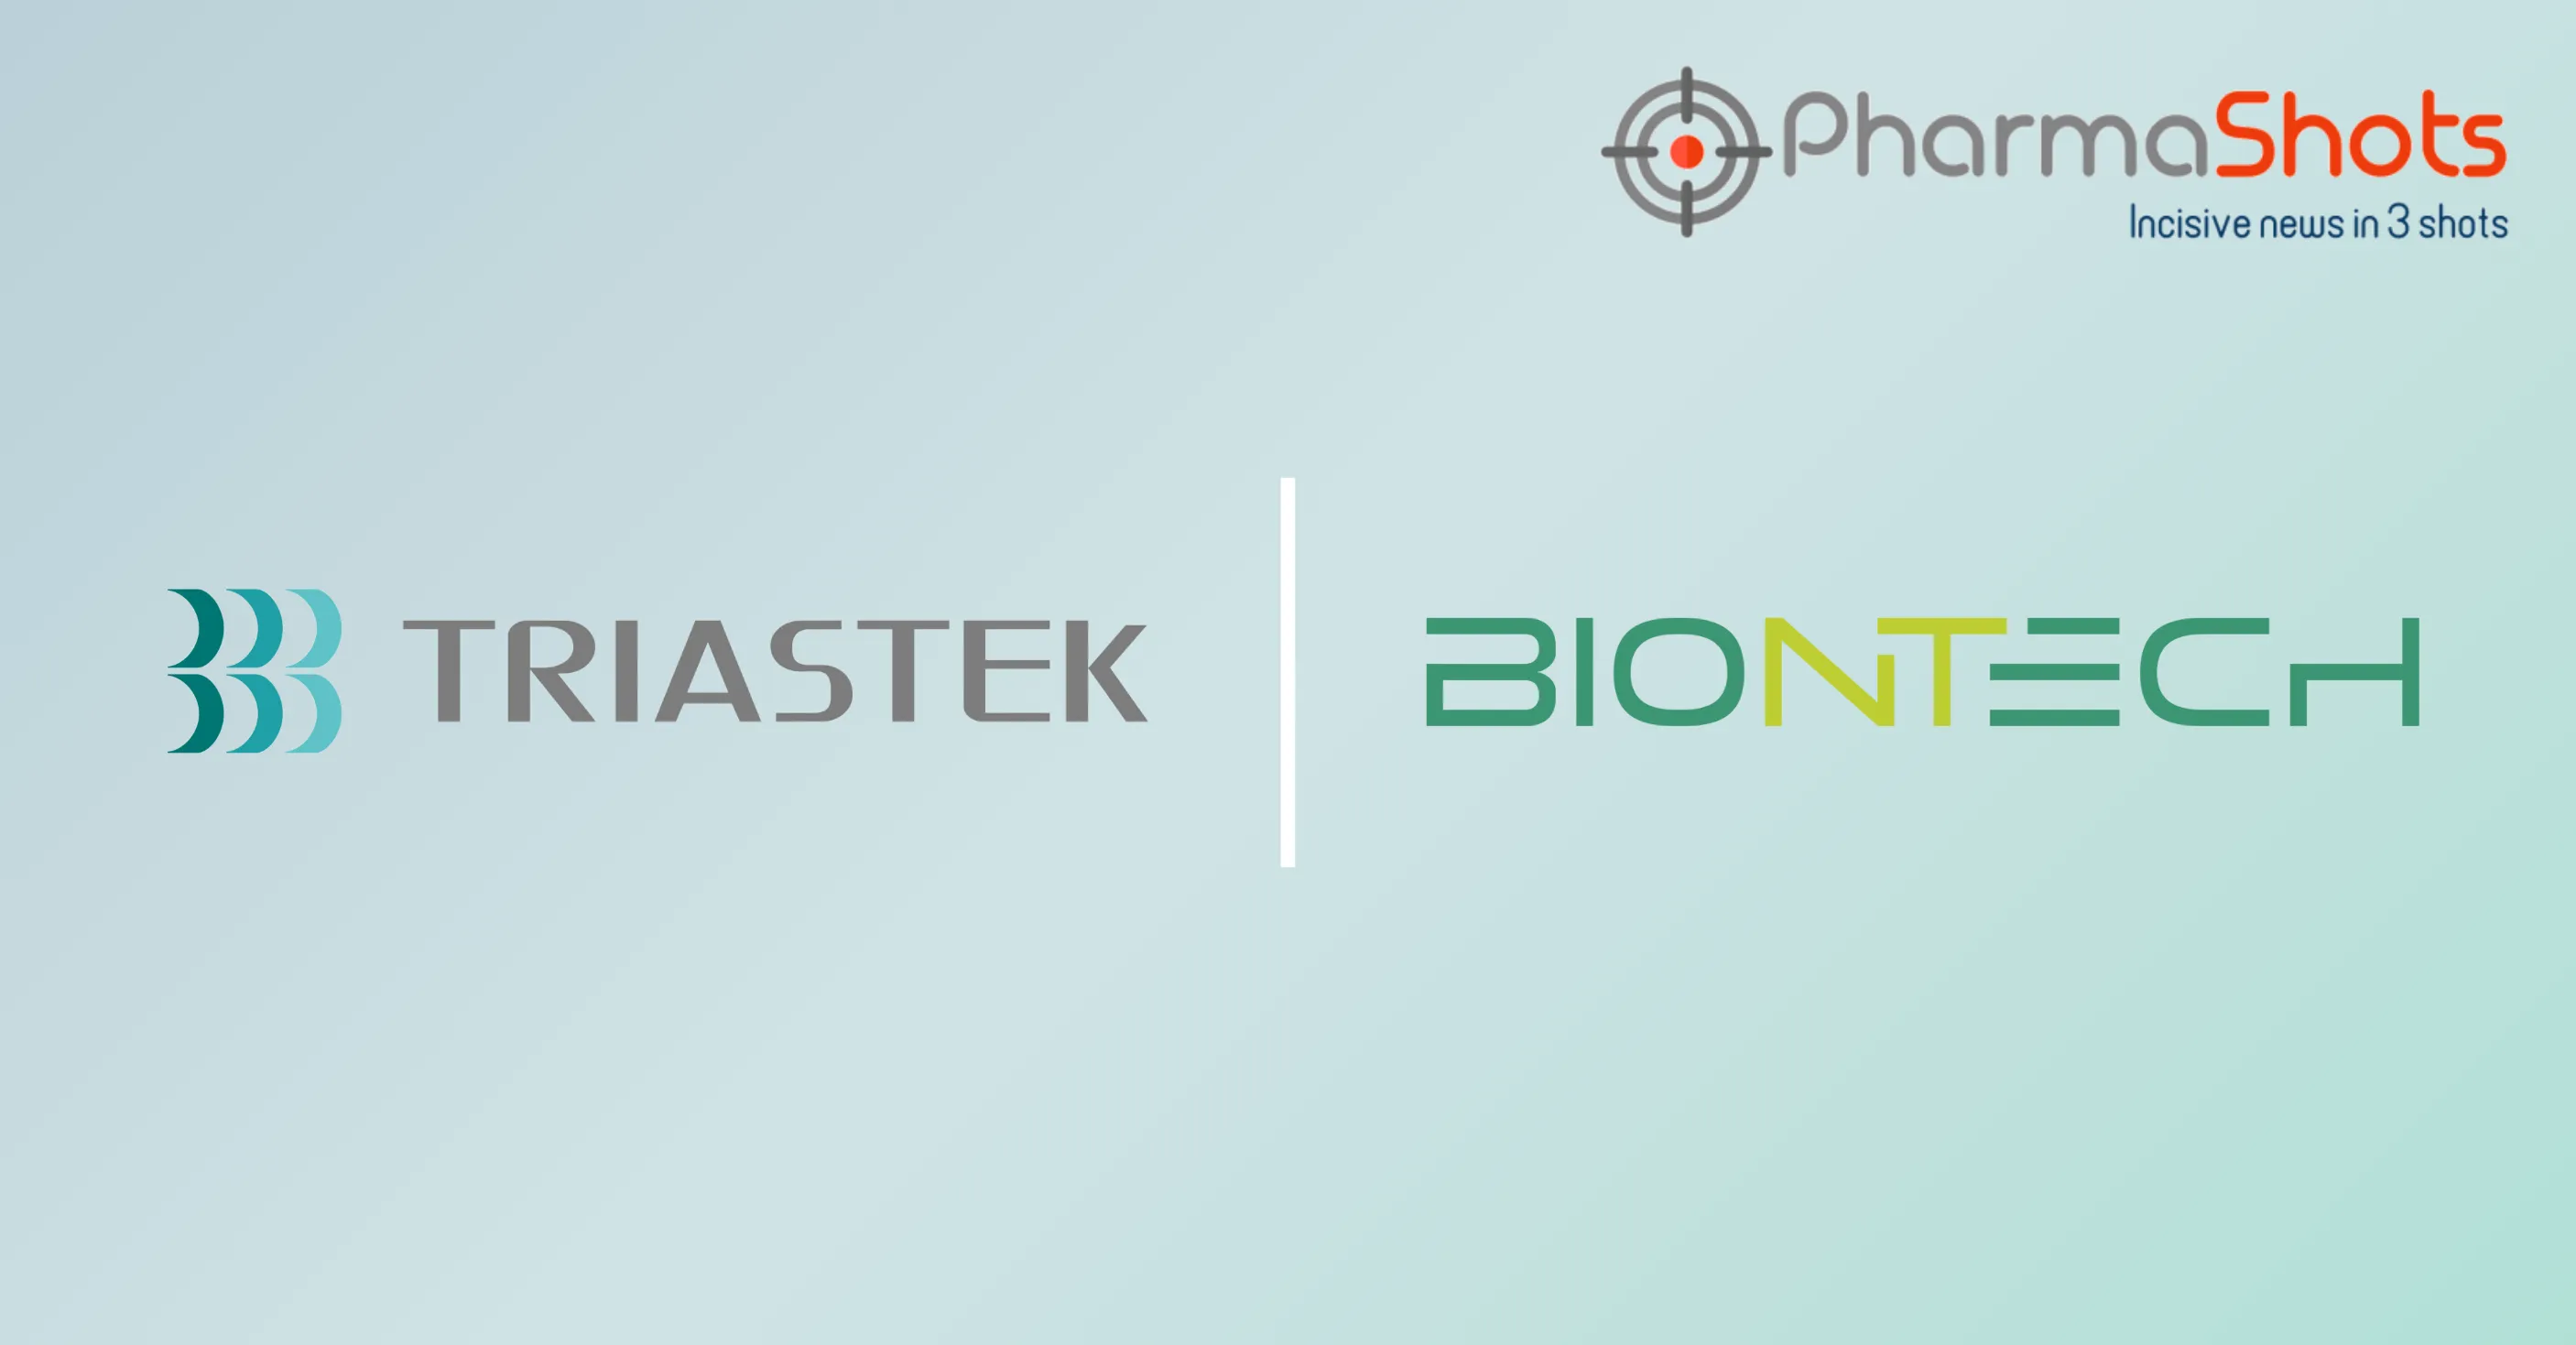 Triastek Partners with BioNTech to Develop 3D Printed Oral RNA Therapeutics